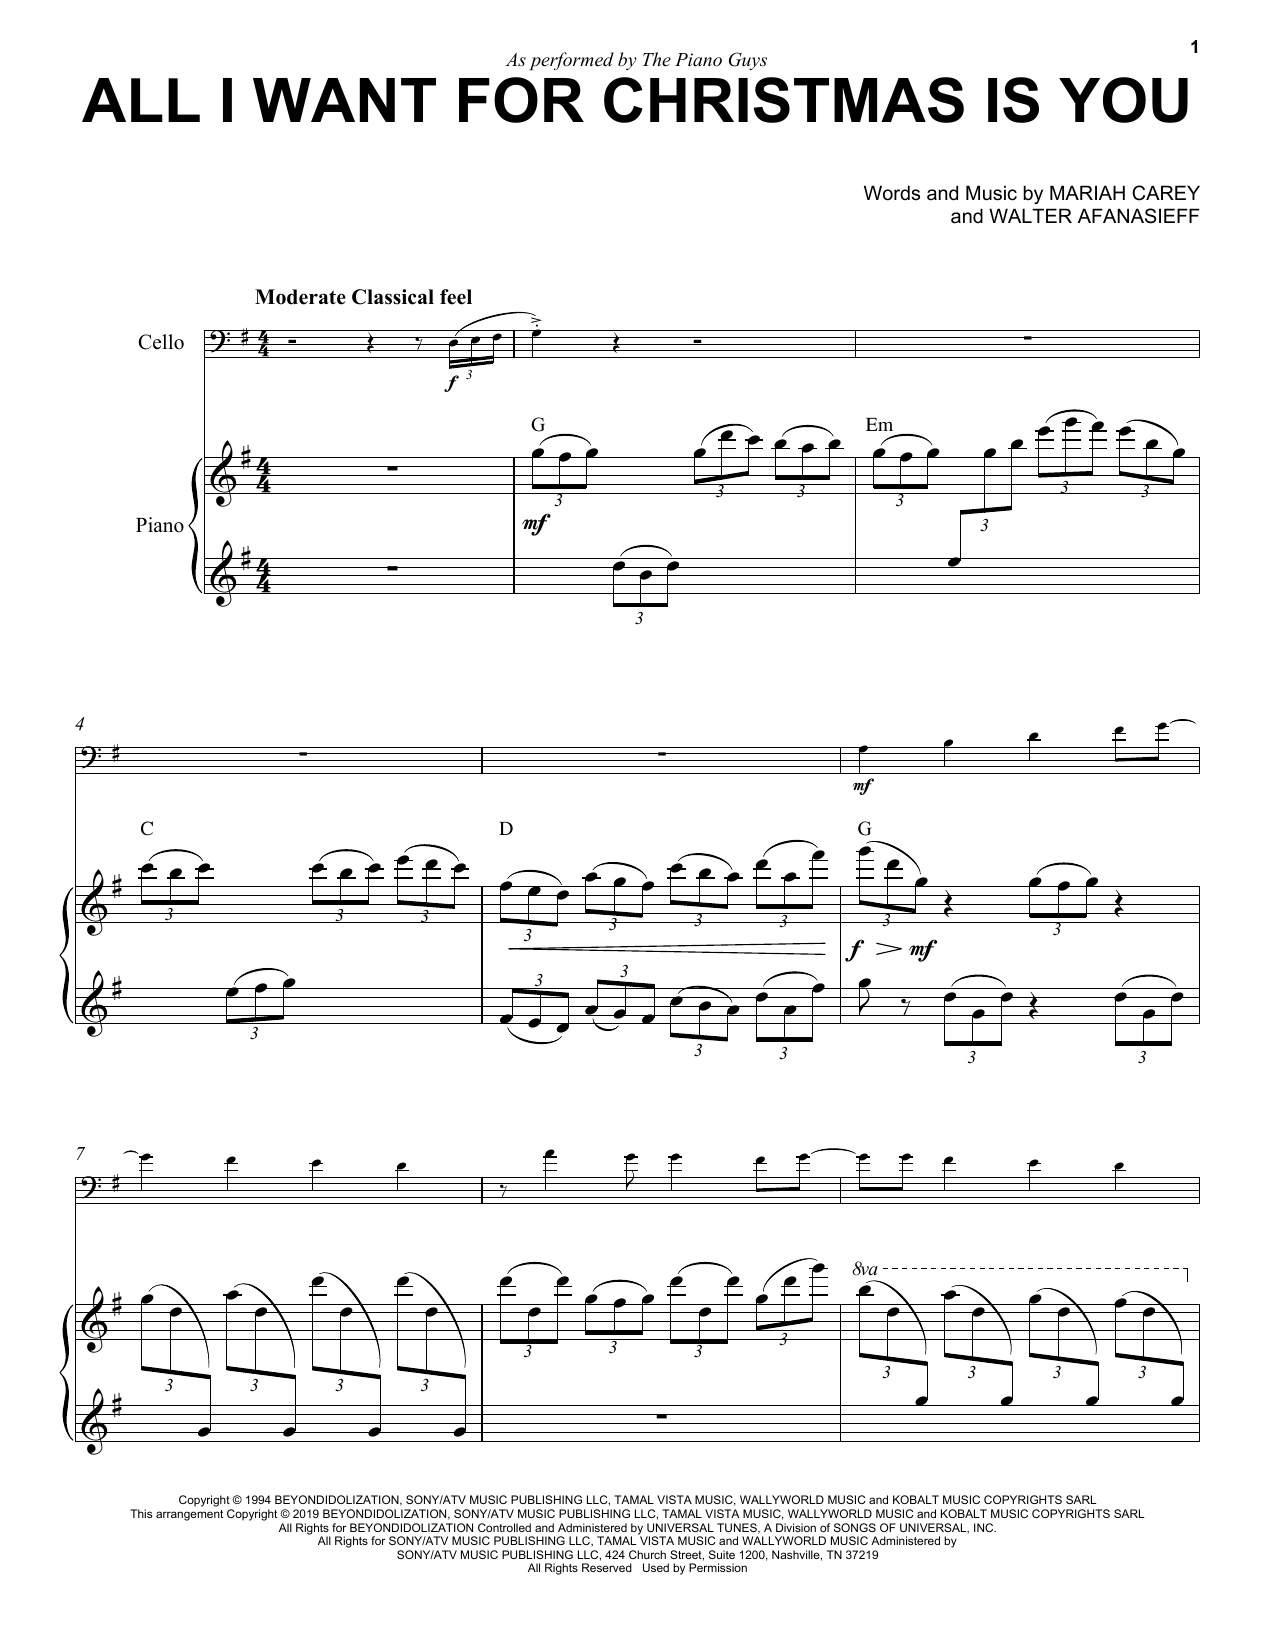 Download The Piano Guys All I Want For Christmas Is You Sheet Music